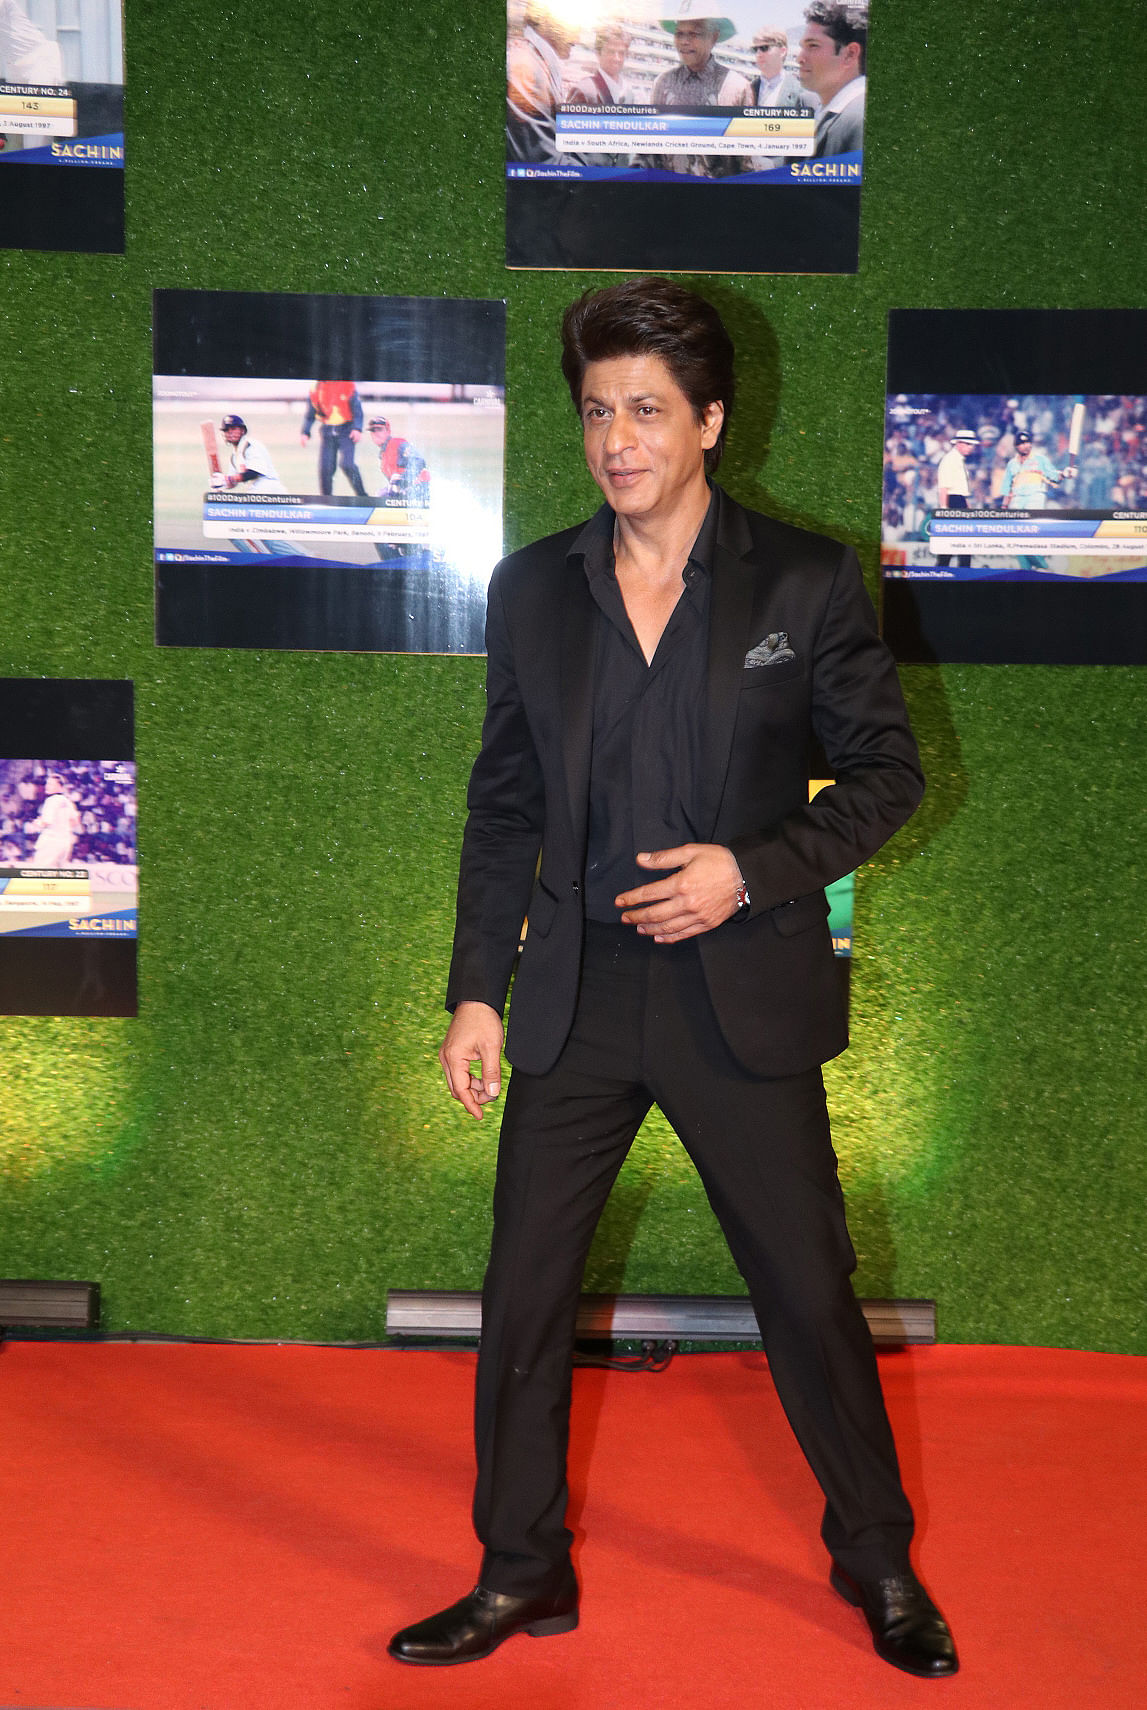 From Shah Rukh Khan to Pahlaj Nihalani - the who’s who of Bollywood were at the ‘Sachin’ premiere.